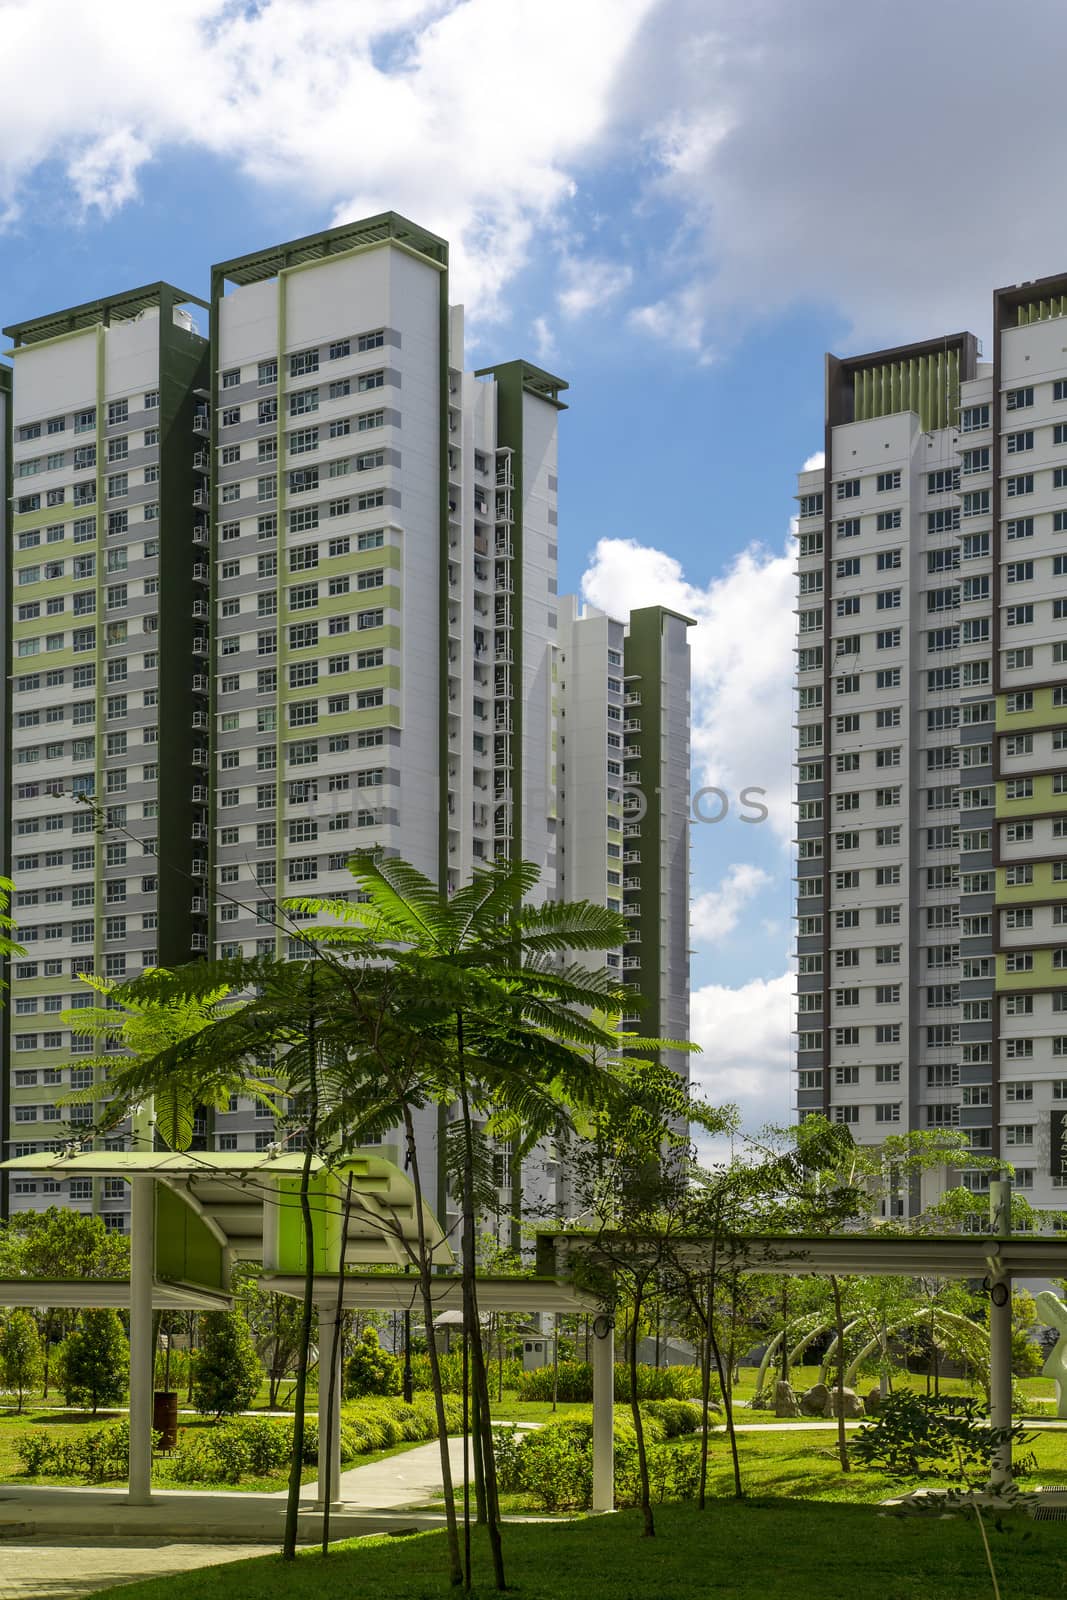 A park leading to a green estate in Singapore.